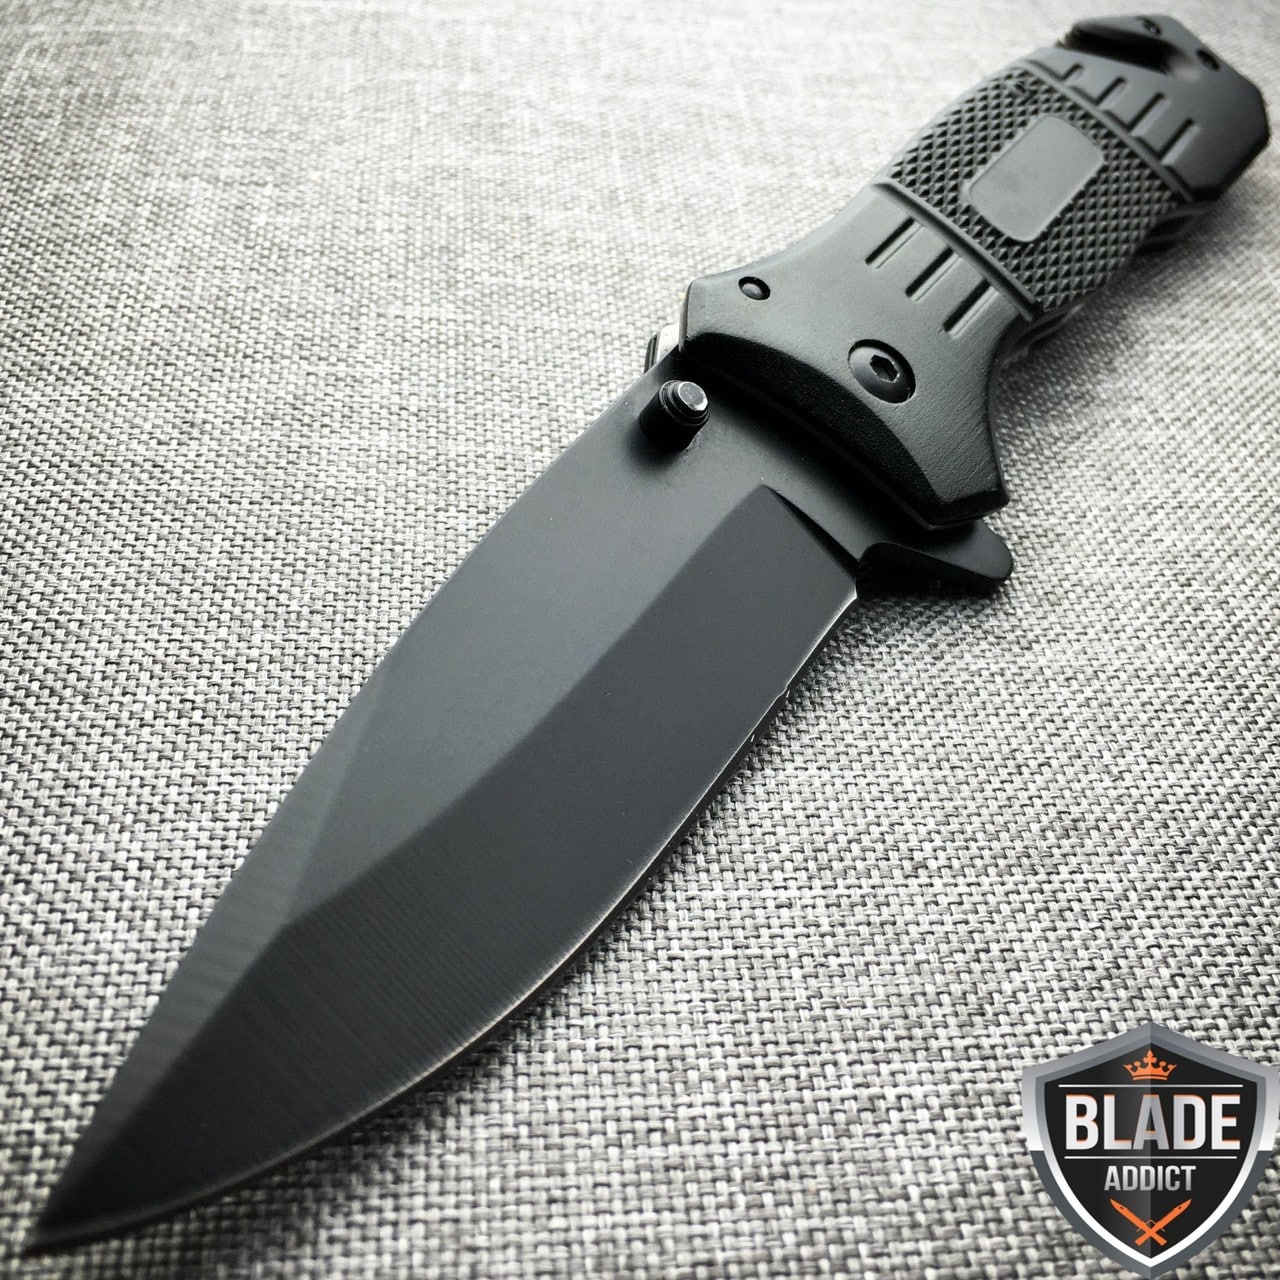 2 PC BLACK TACTICAL SURVIVAL Rambo Hunting FIXED BLADE KNIFE Bowie w/ SHEATH -x